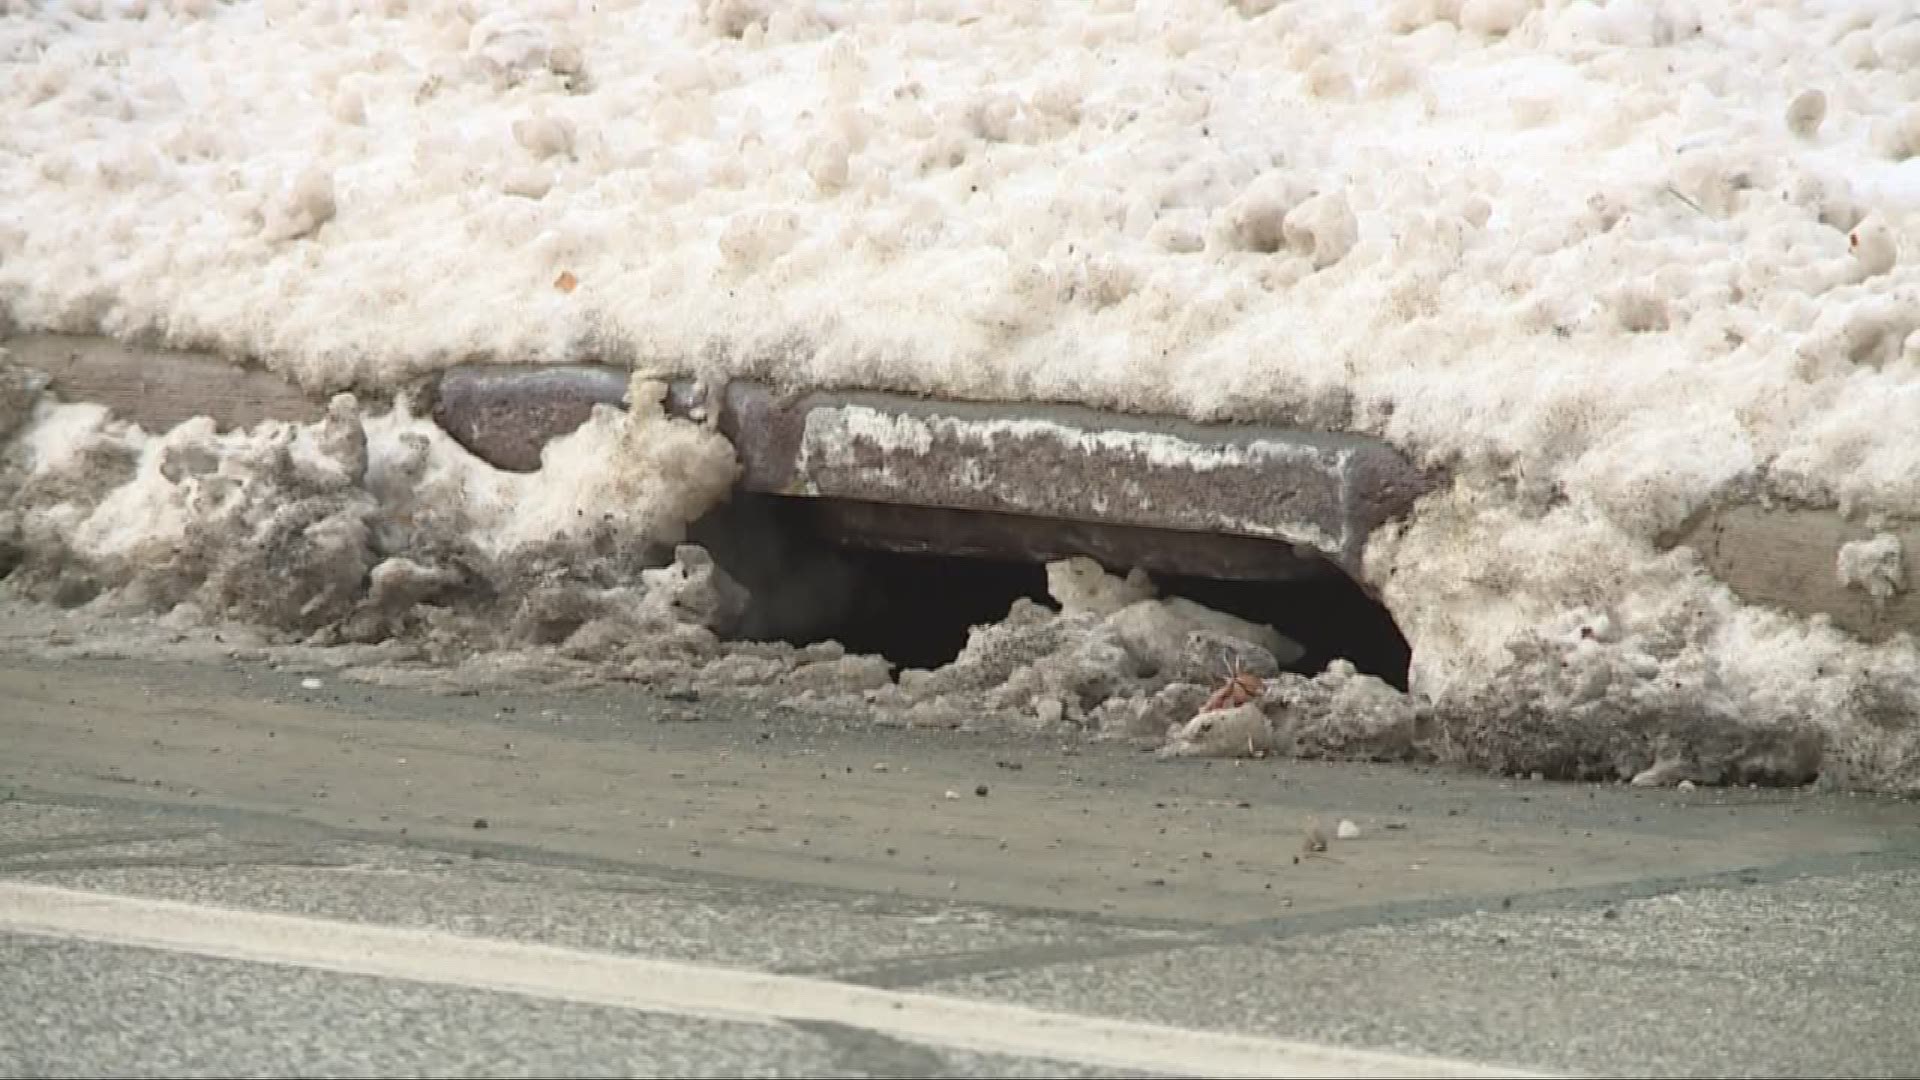 Now may be a good time to check your storm drain and furnace